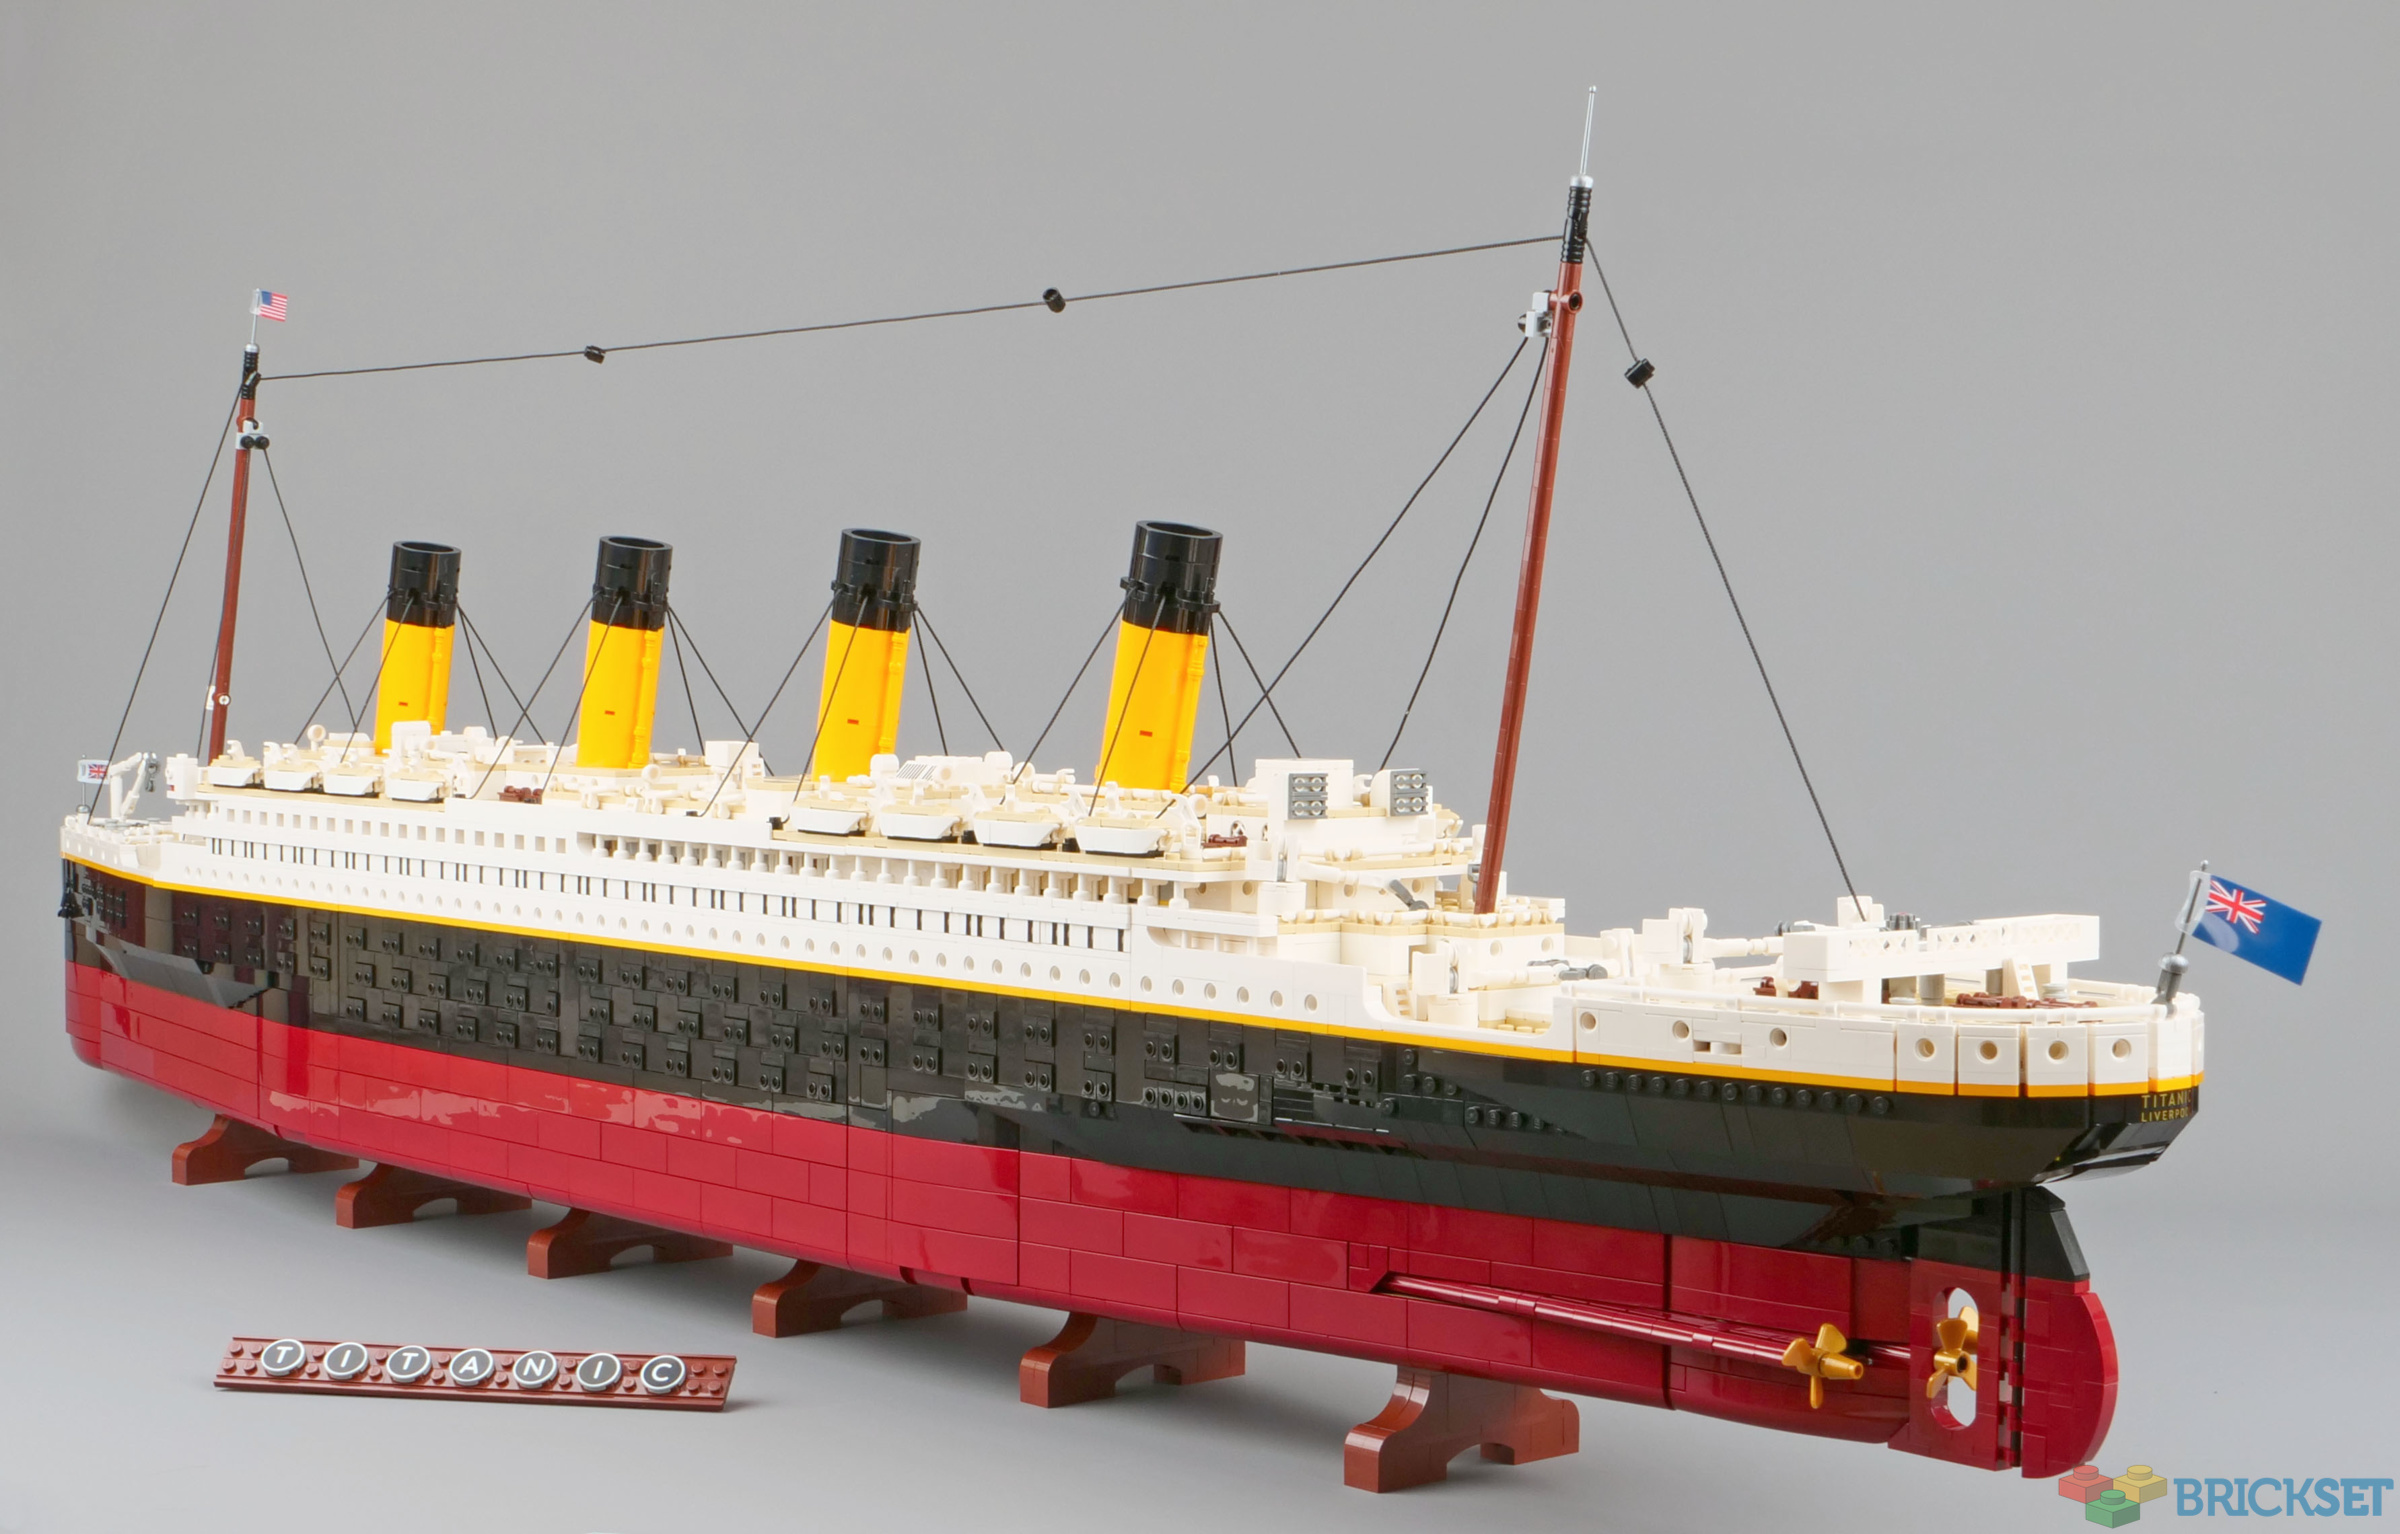 LEGO Titanic Is a Build of Historic Proportions, Comes With Over 9,000  Pieces - autoevolution